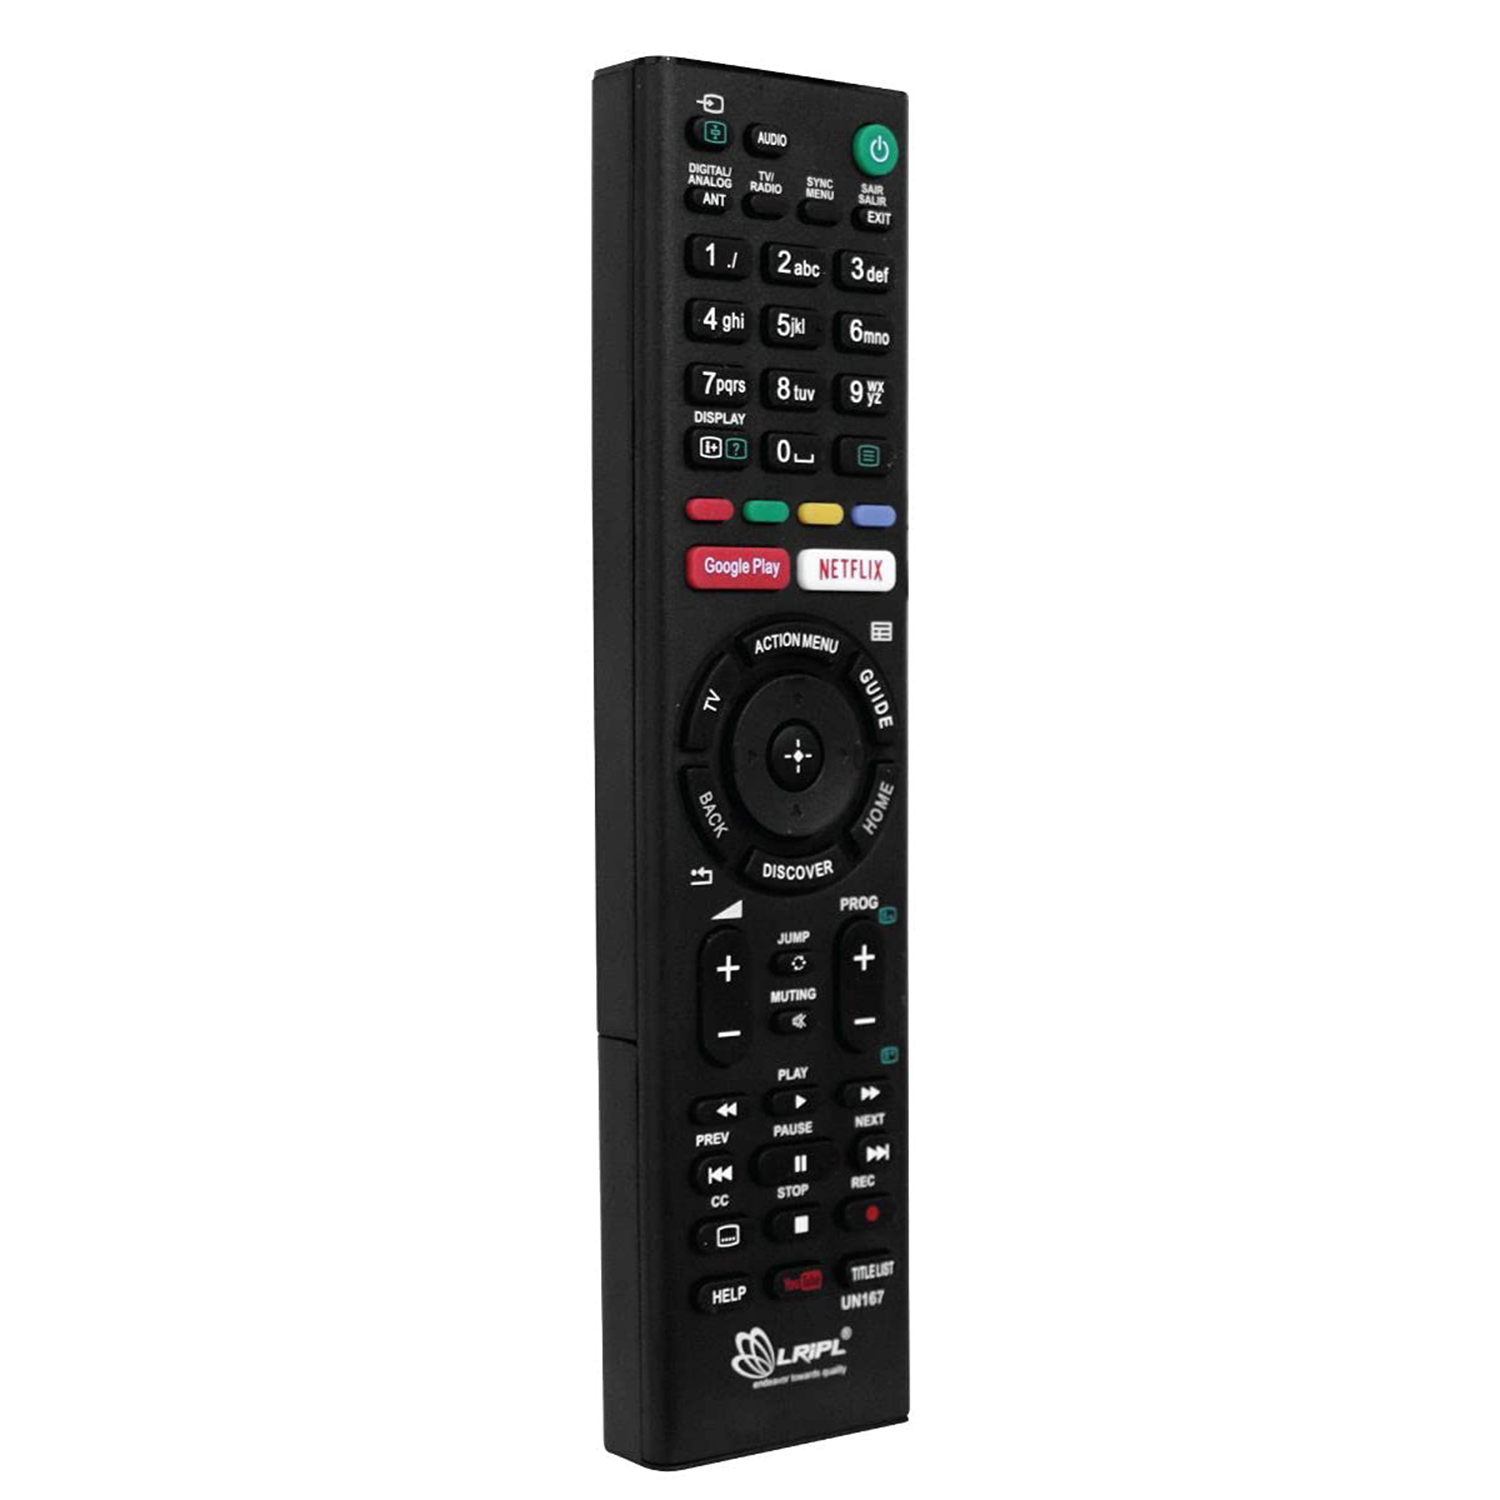 LRIPL Remote Control for Sony Smart LED LCD HD UHD TV with Google Play YouTube and Netflix Button (Black)